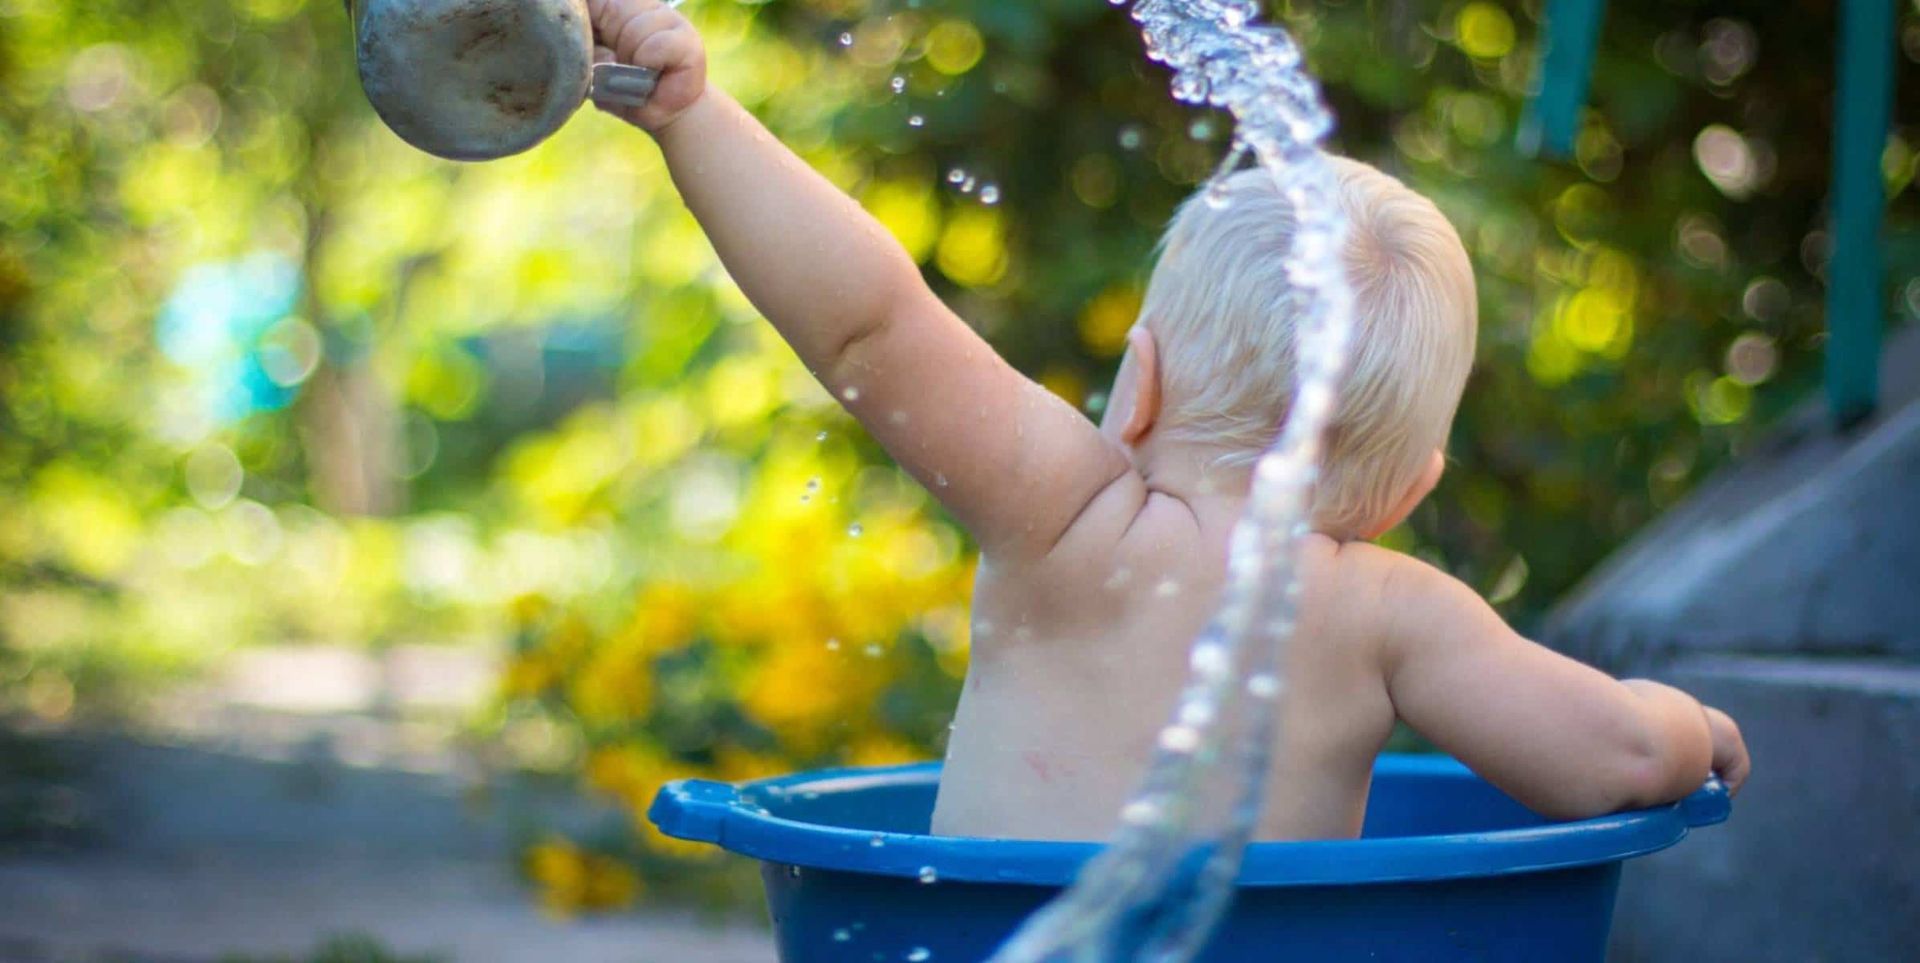 How to Beat Summer Heat | Keeping Cool in Summer